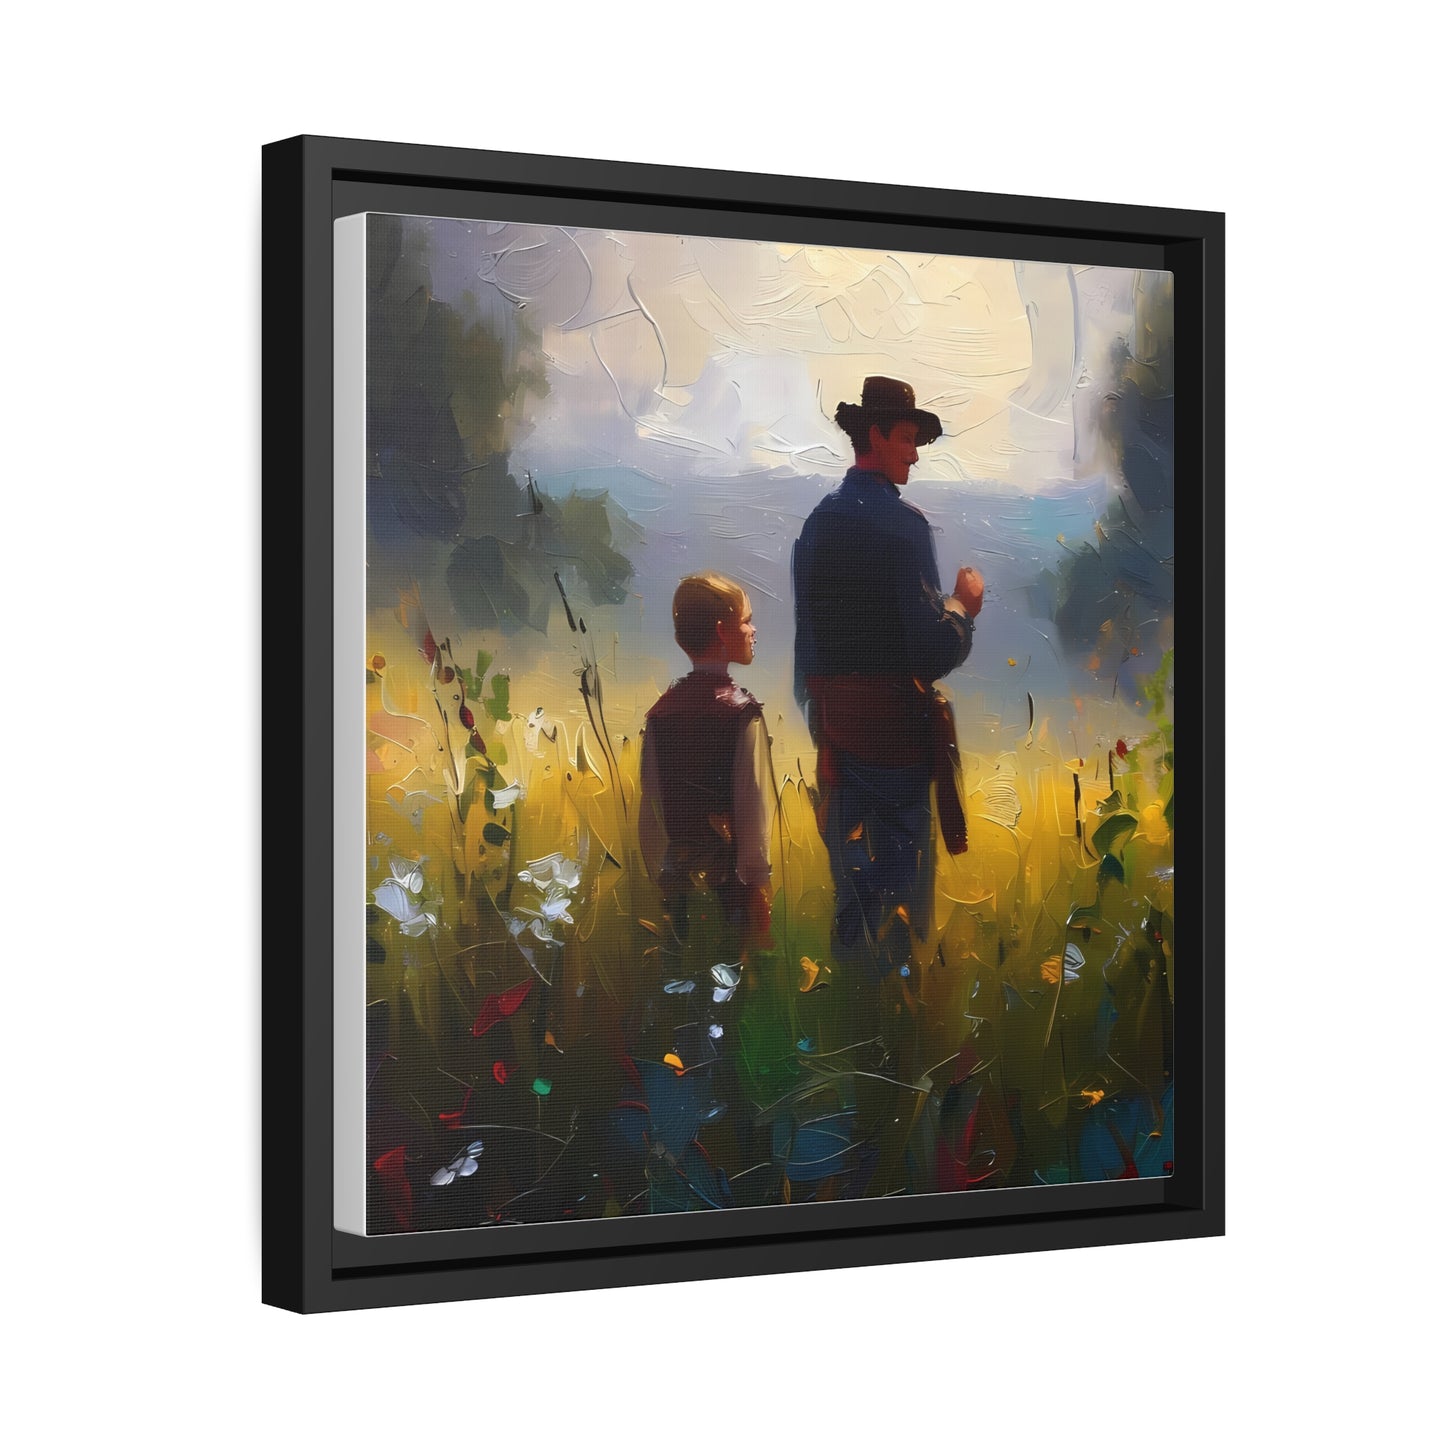 Awesome Matte Wall Art Canvas Decor Black Frame - Fathers Day Gift Item